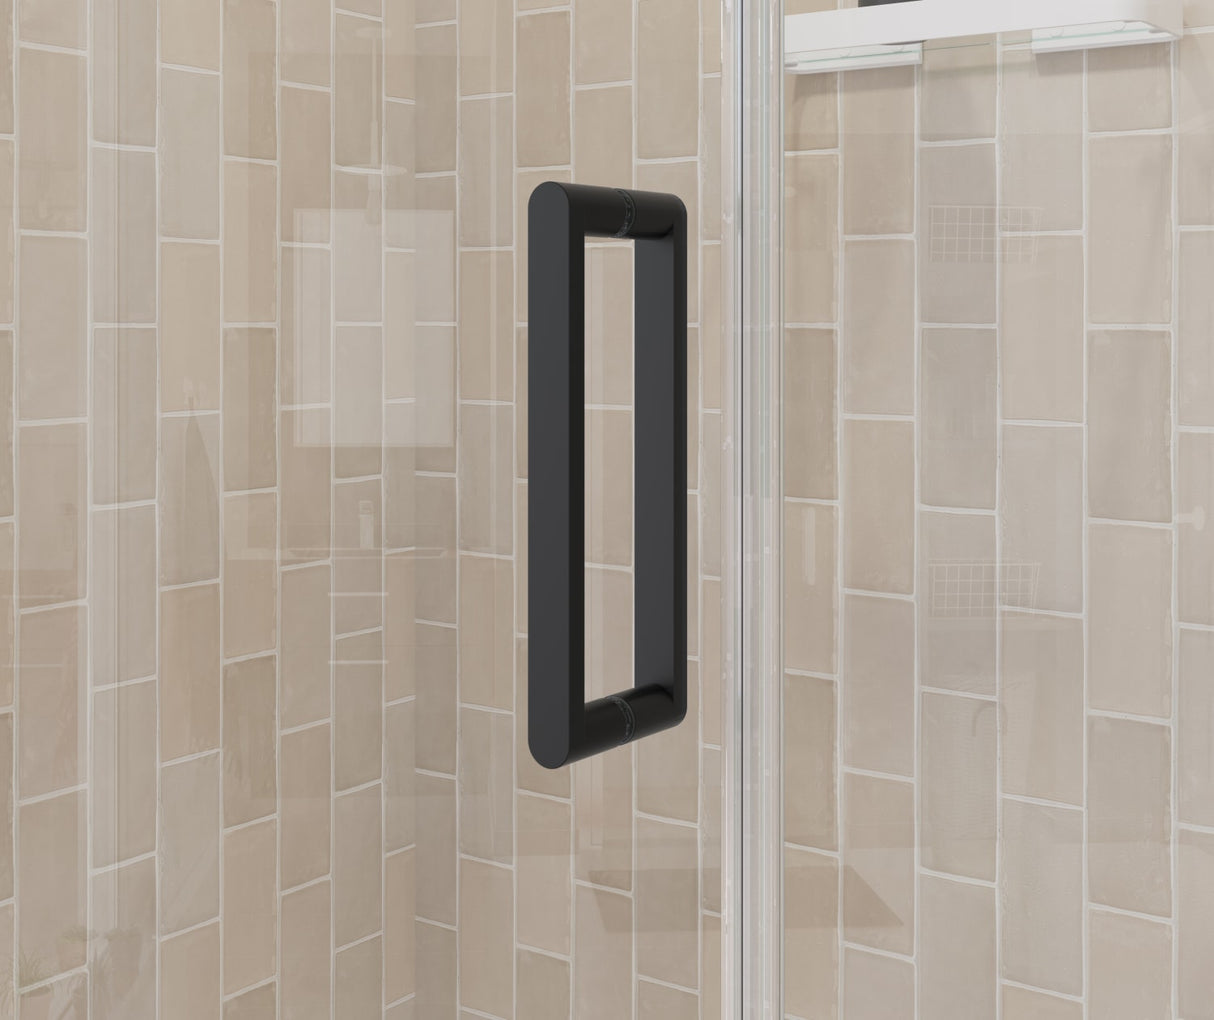 MAAX 138270-900-340-100 Manhattan 43-45 x 68 in. 6 mm Pivot Shower Door for Alcove Installation with Clear glass & Round Handle in Matte Black